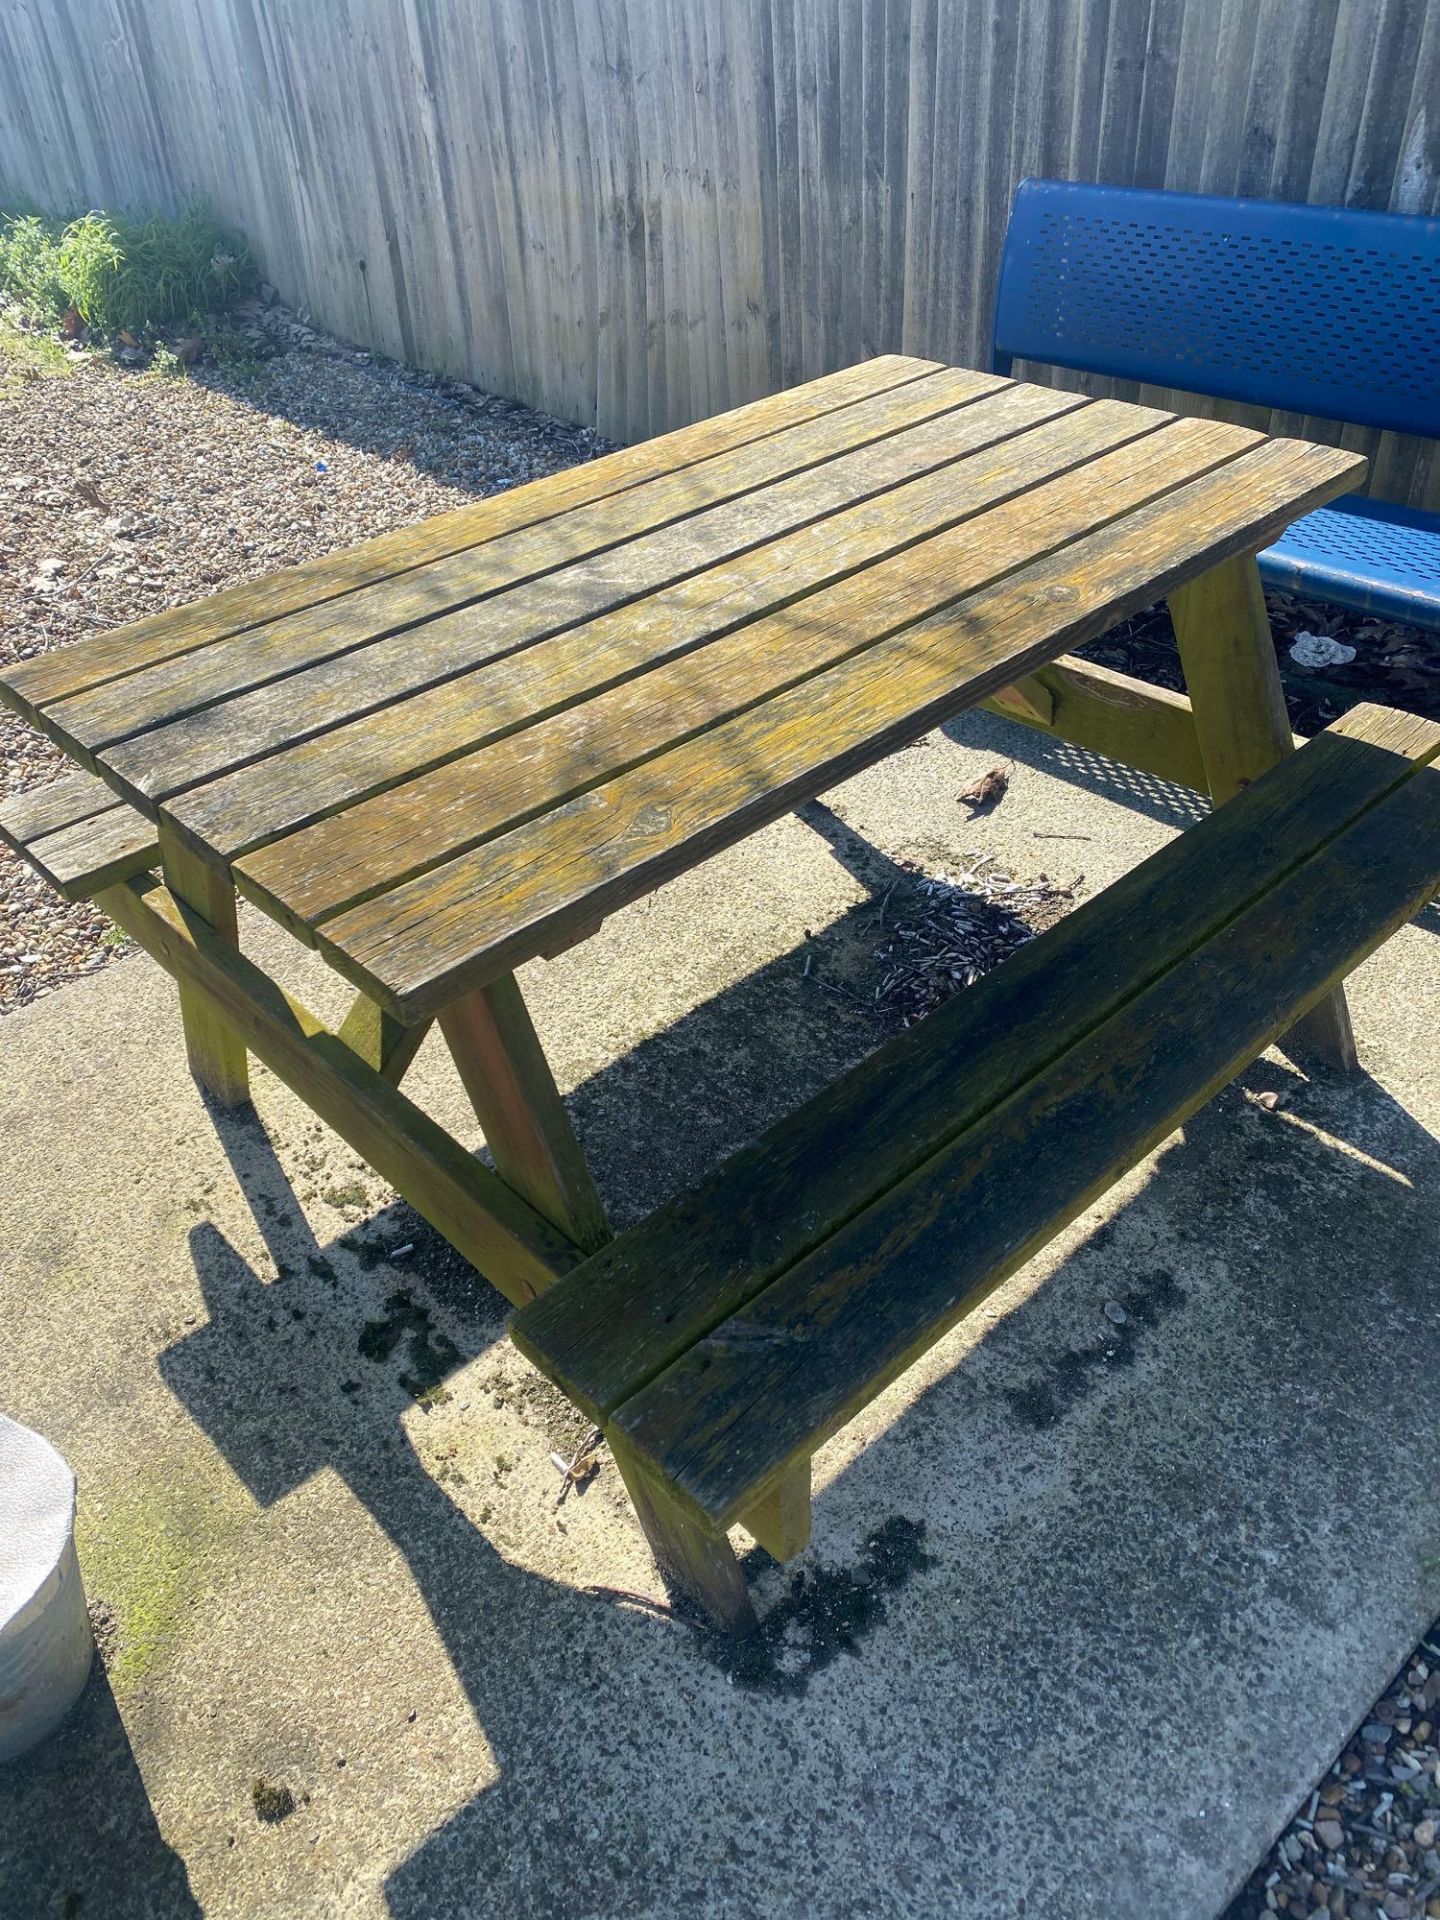 Two wooden picnic benches